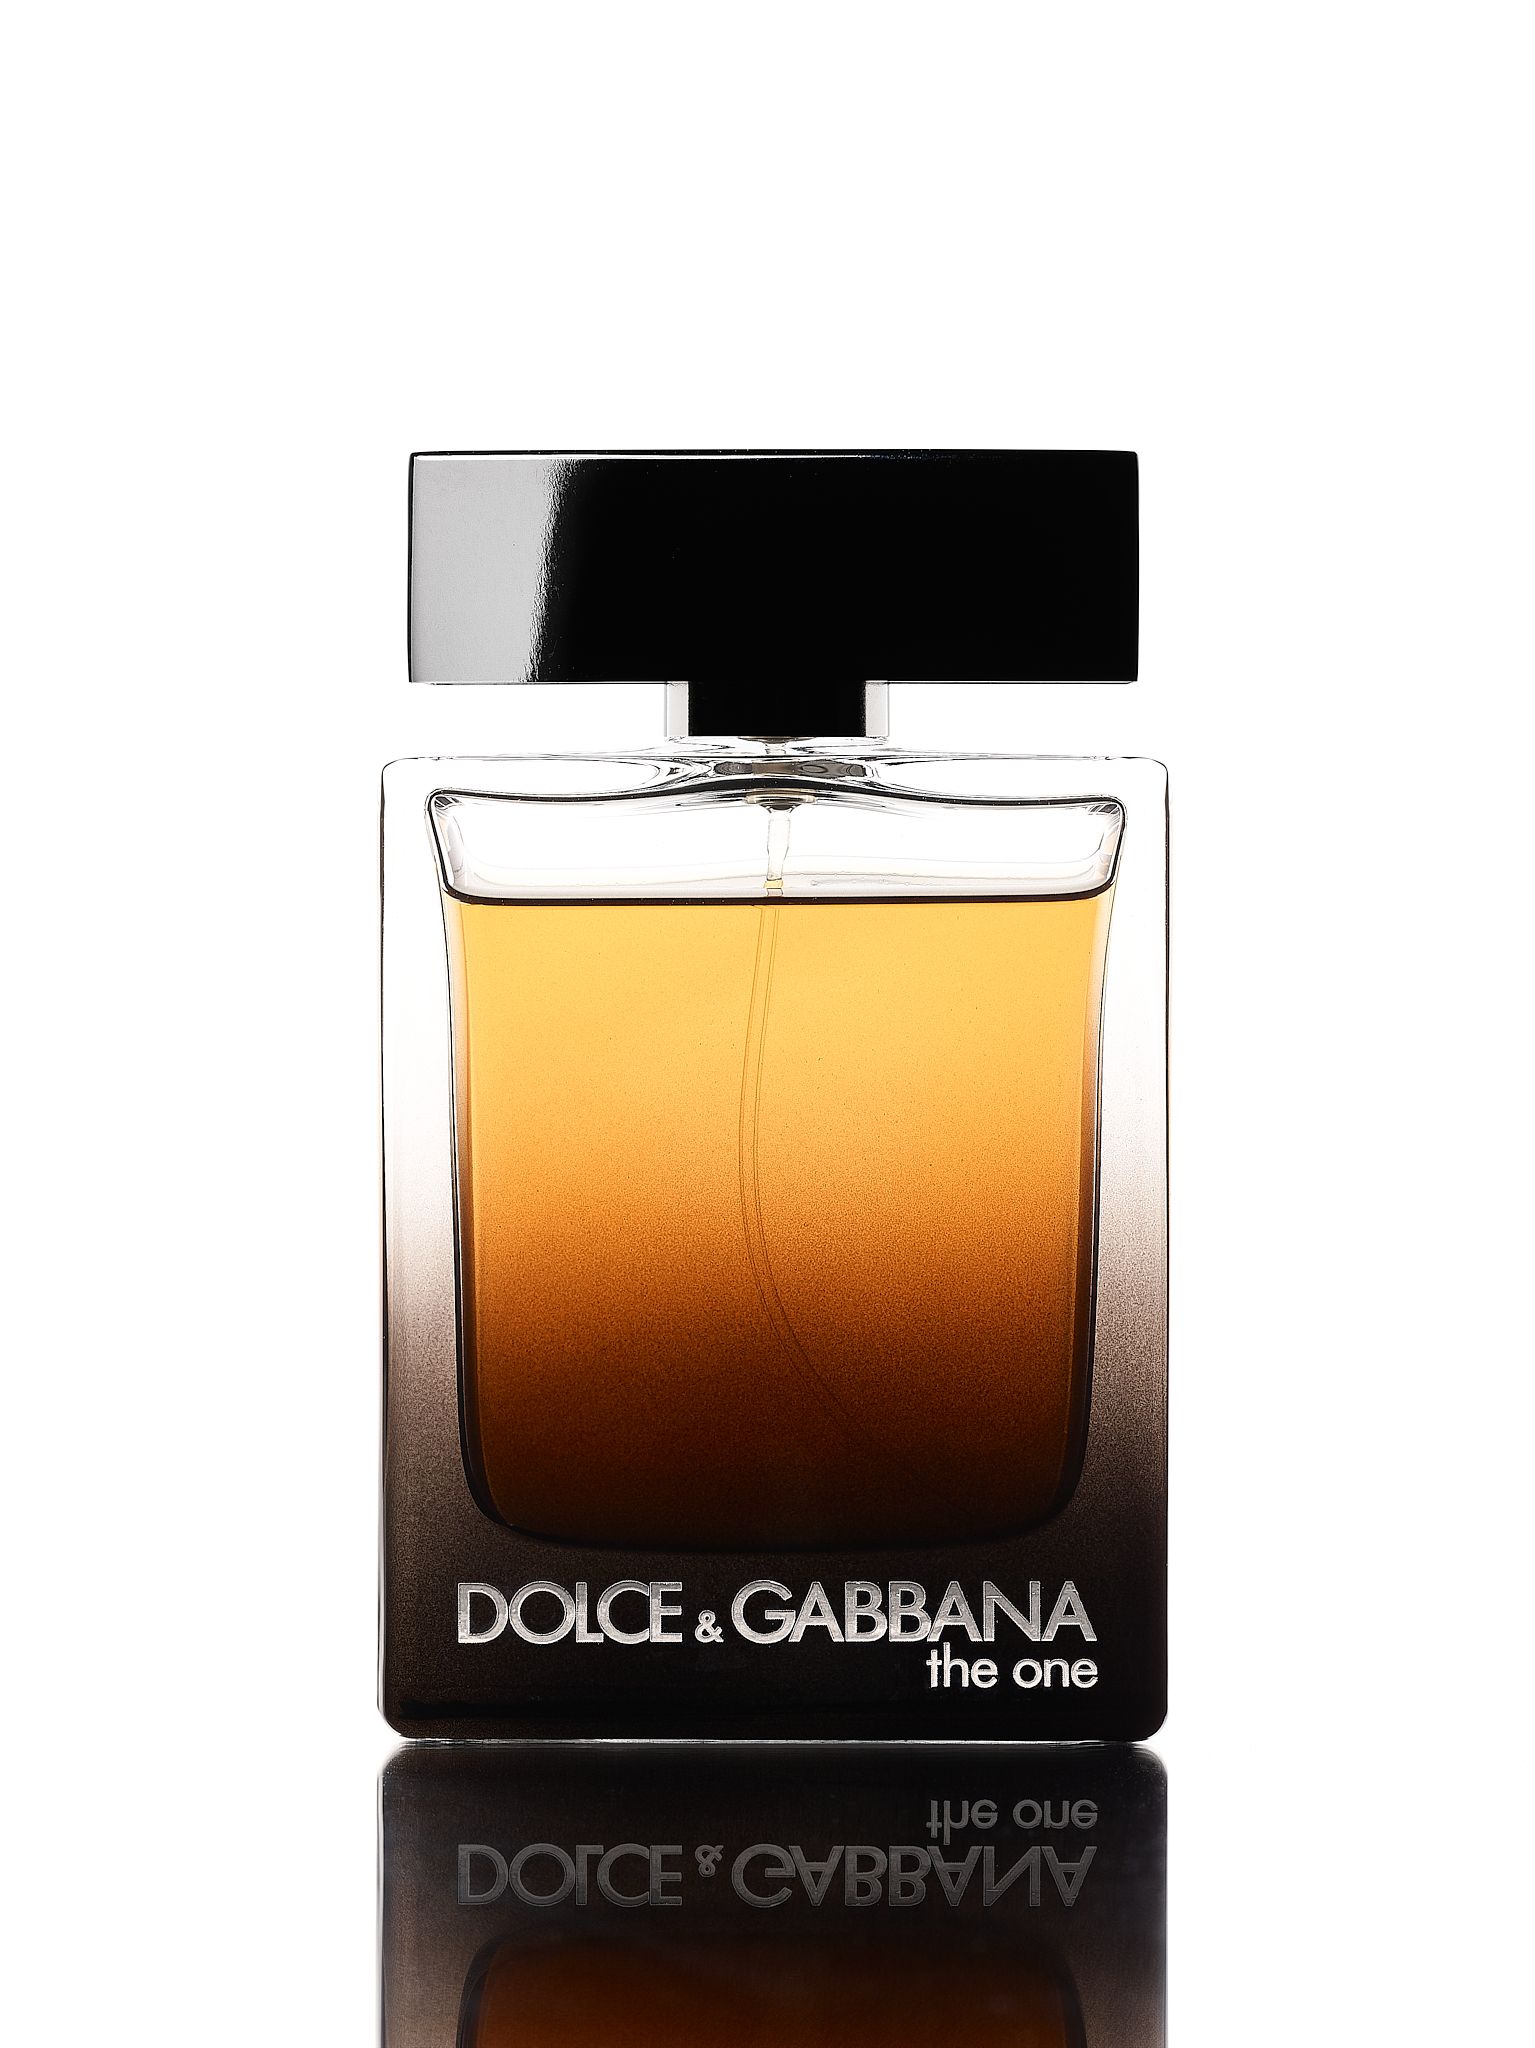 Dolce & Gabbana The One - Pic. 1